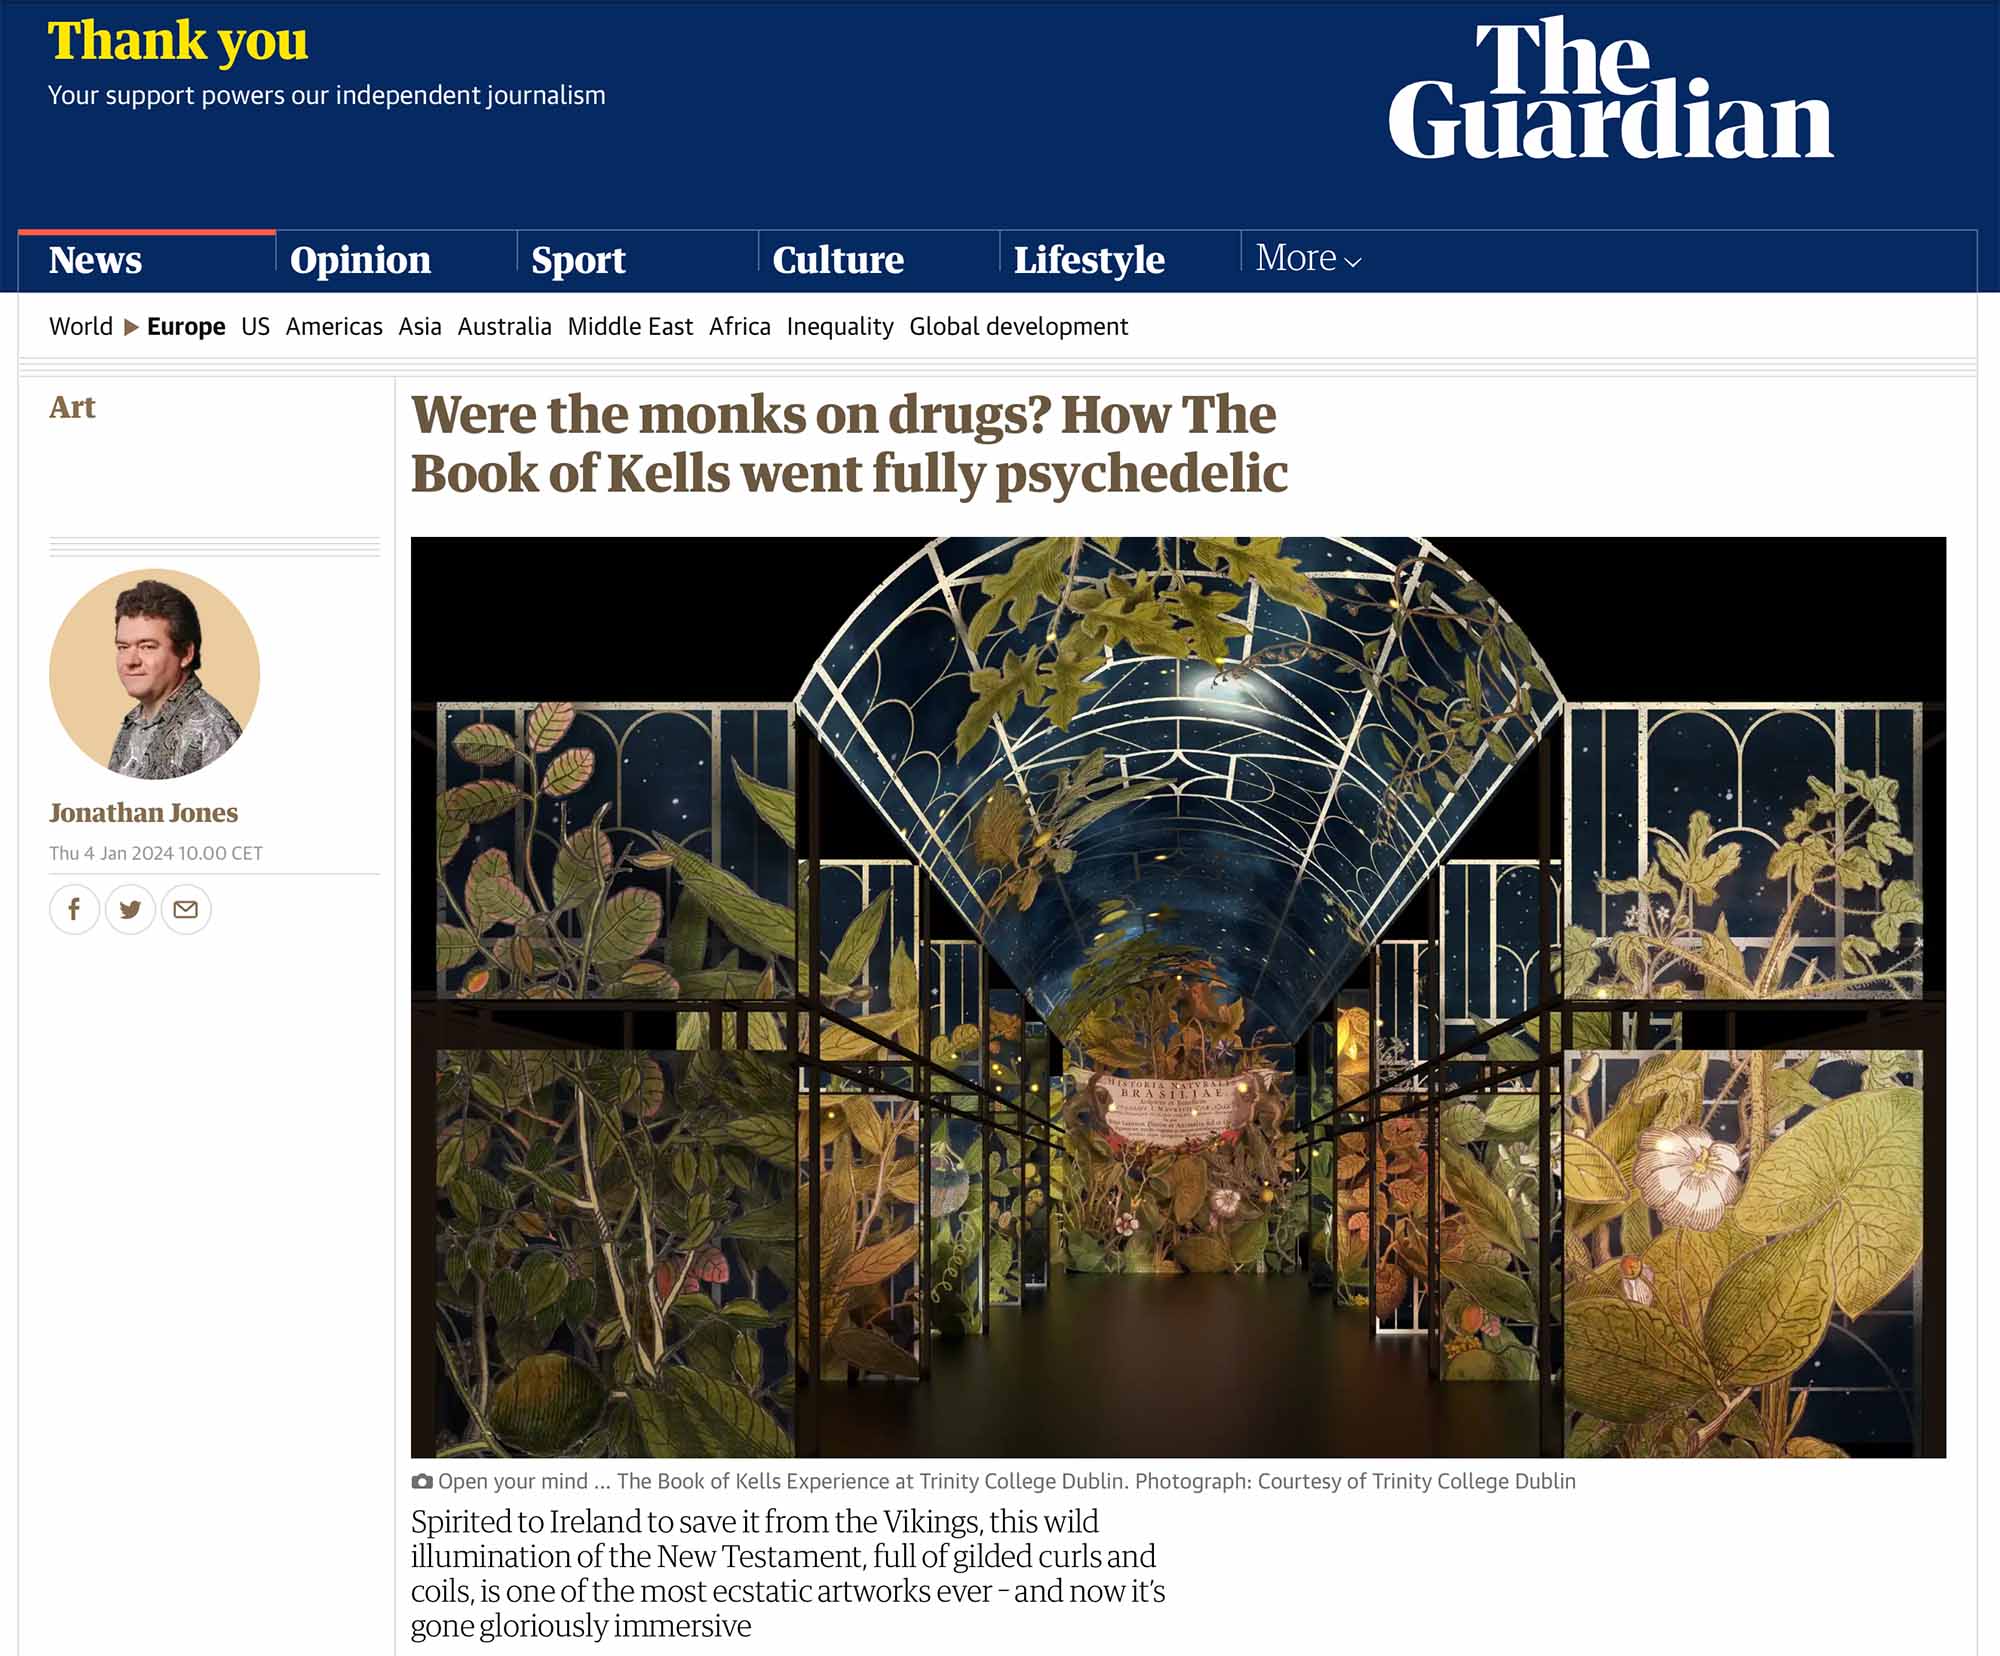 Book of Kells Experience article in The Guardian